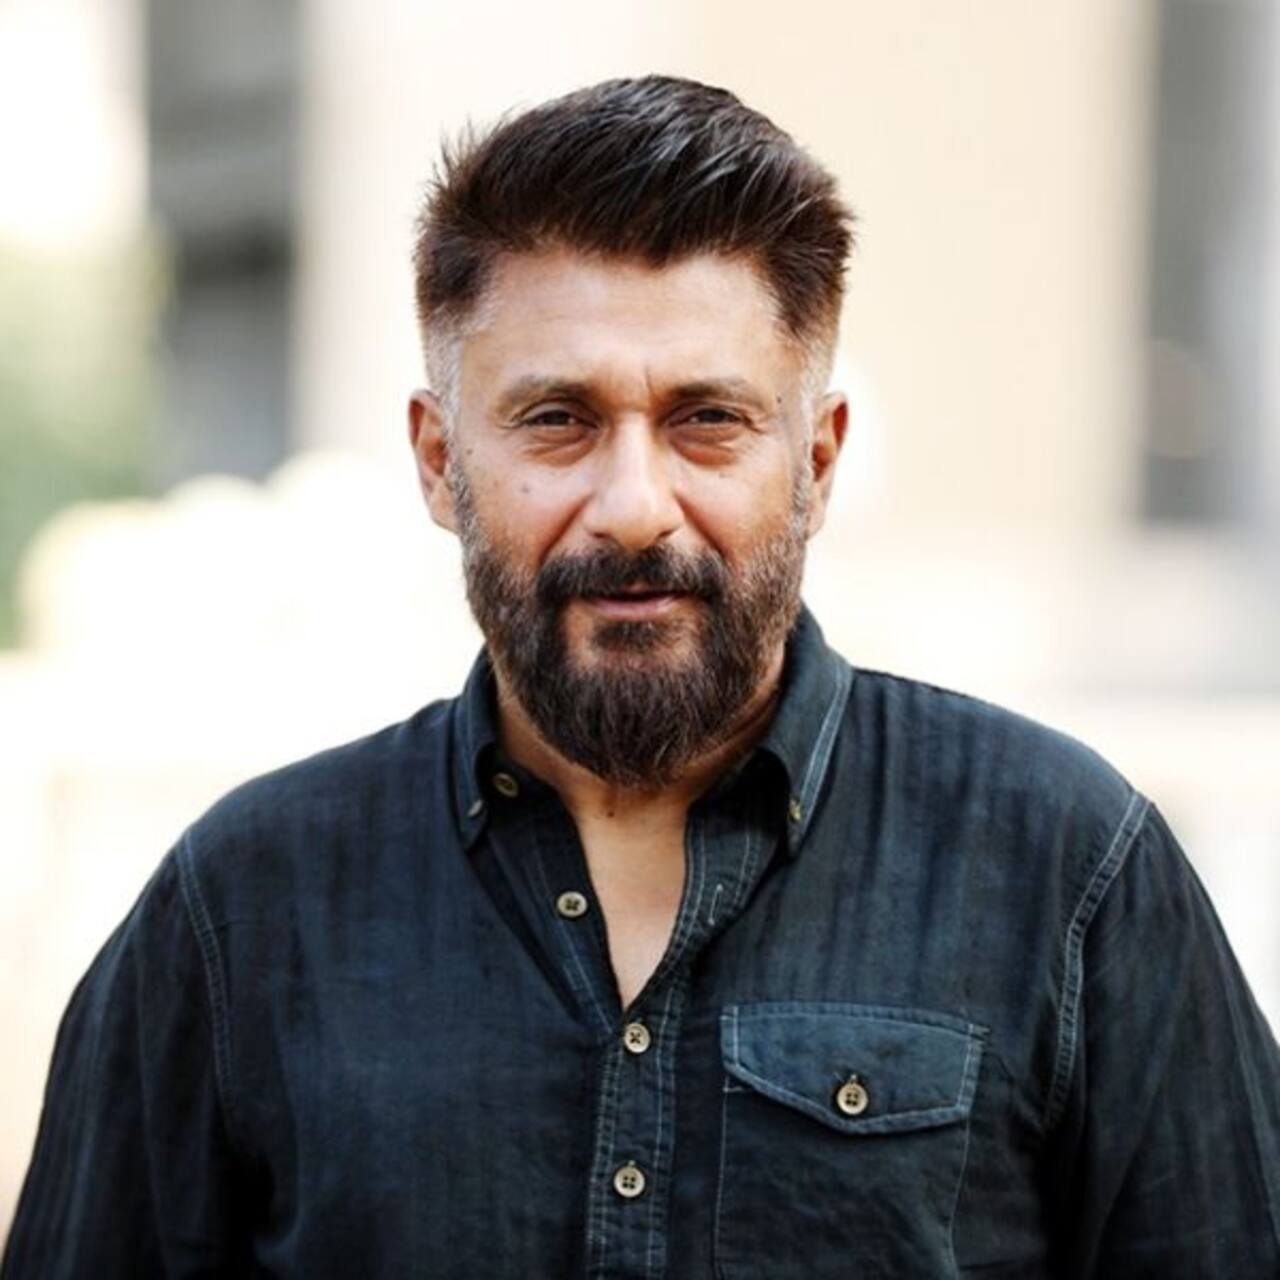 The Kashmir Files maker Vivek Agnihotri hits back at IAS officer who asked him to donate film's earnings for welfare of Kashmiri Pandits